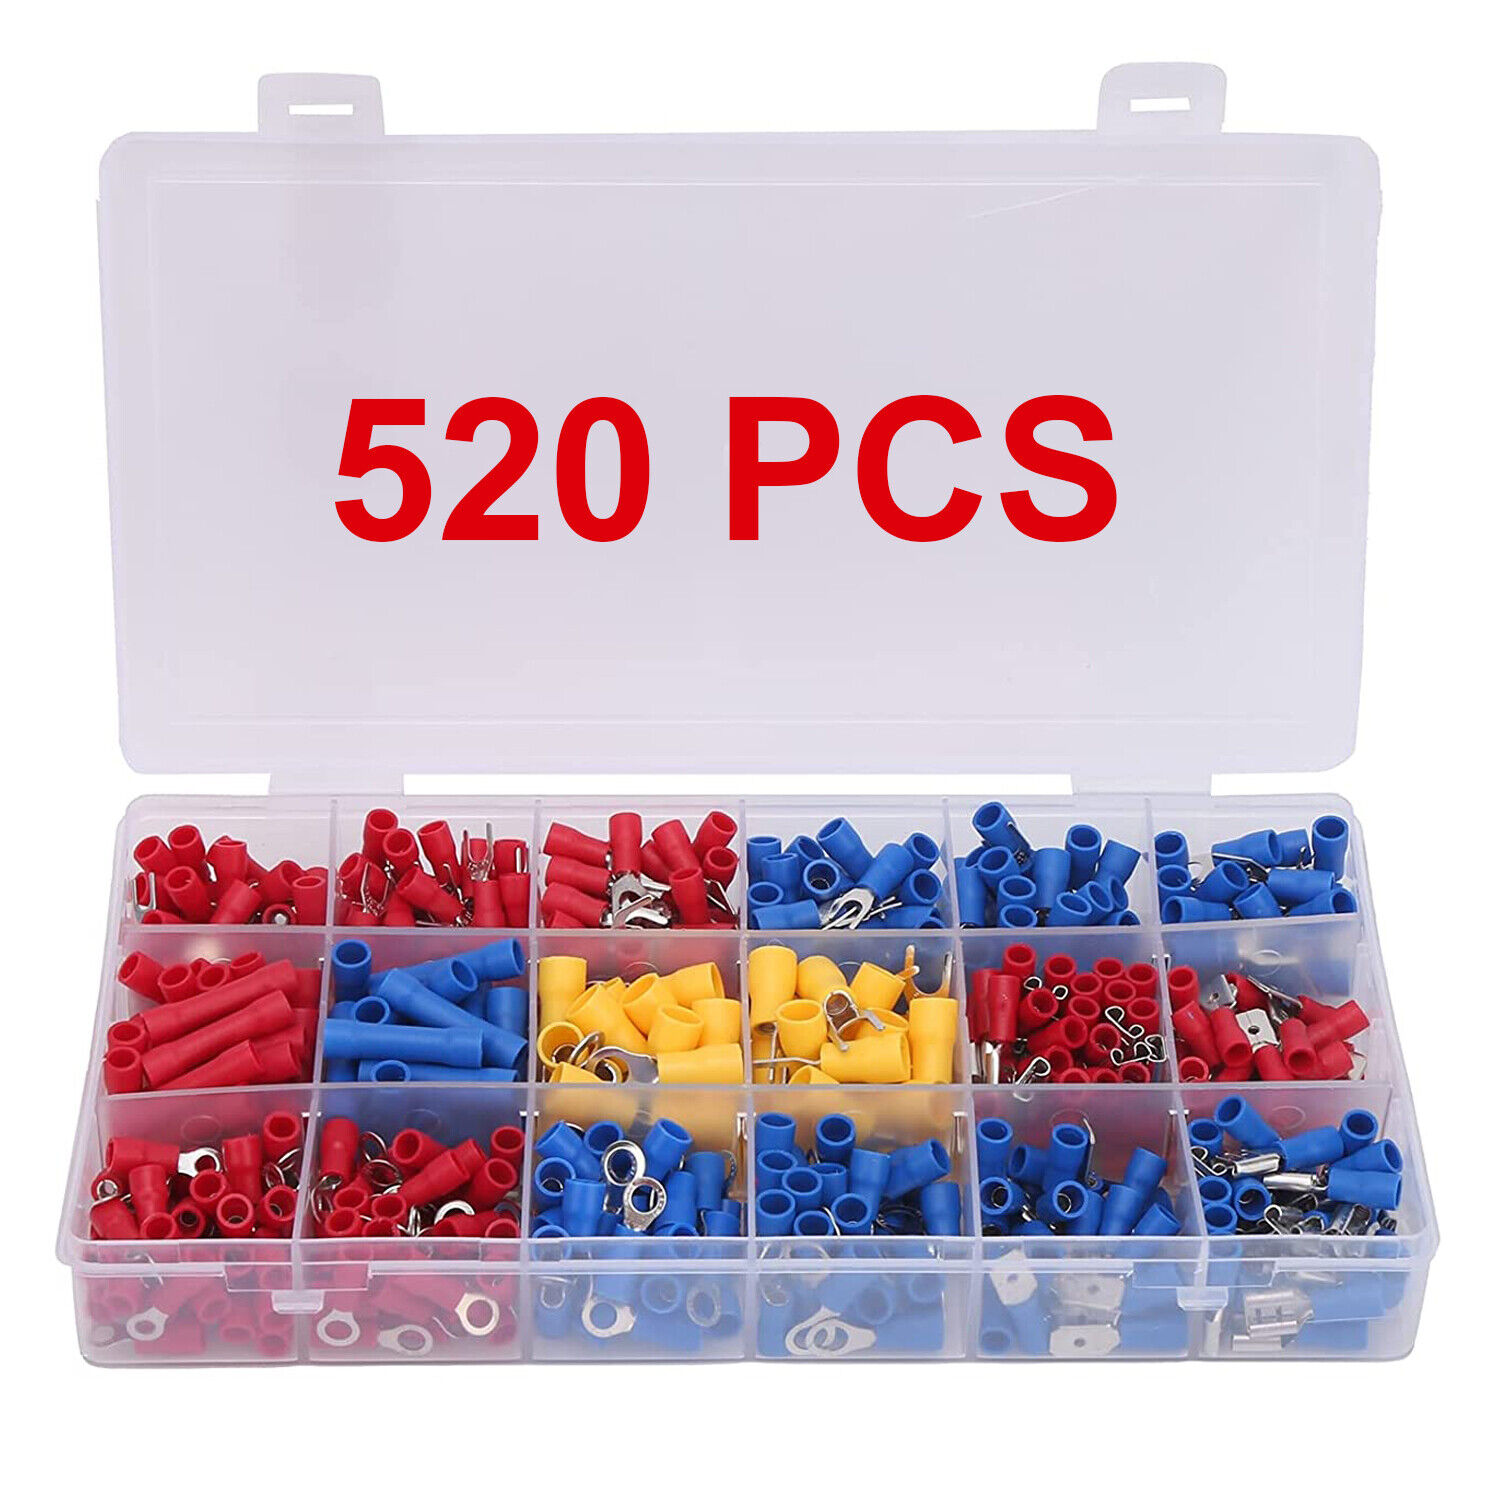 520 PCS Heat Shrink Wire Connectors, Multipurpose Waterproof Electrical Wire Terminals kit, Insulated Crimp Connectors Ring Fork Spade Butt Splices for Automotive Marine Boat Truck